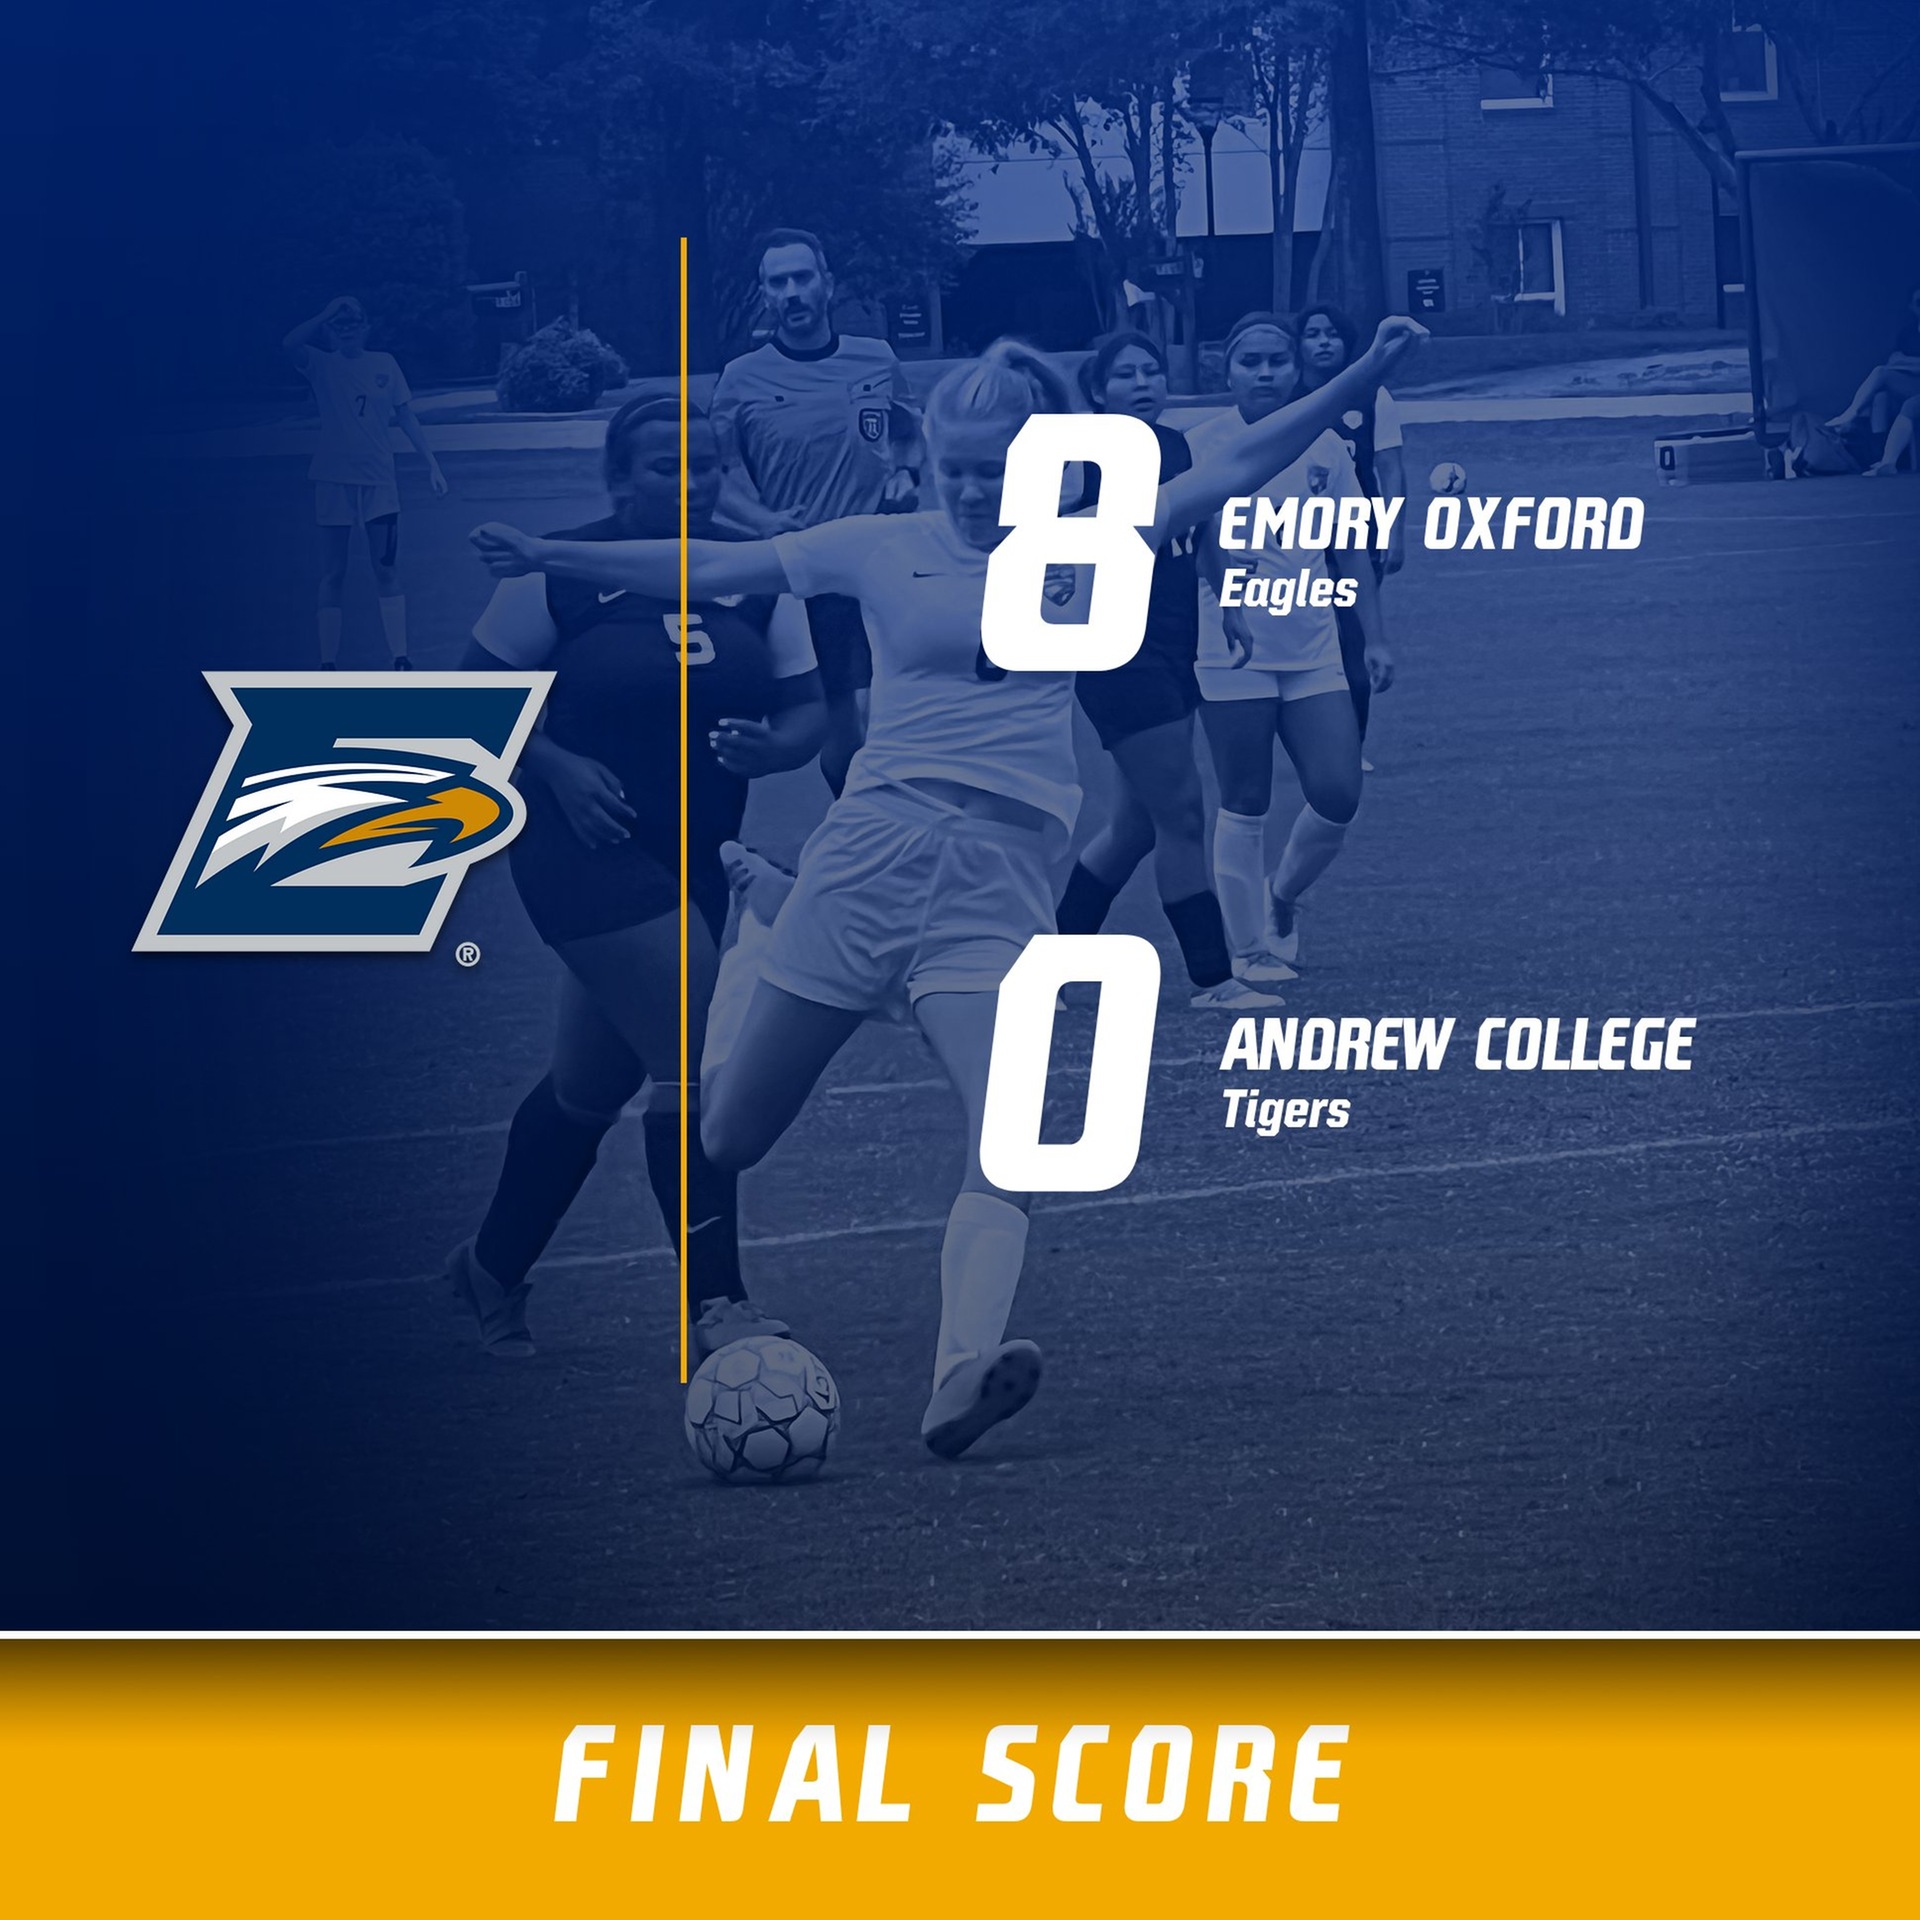 Eagles Women Picked Up First Win of the Season as They Dominate Andrew College 8 to 0